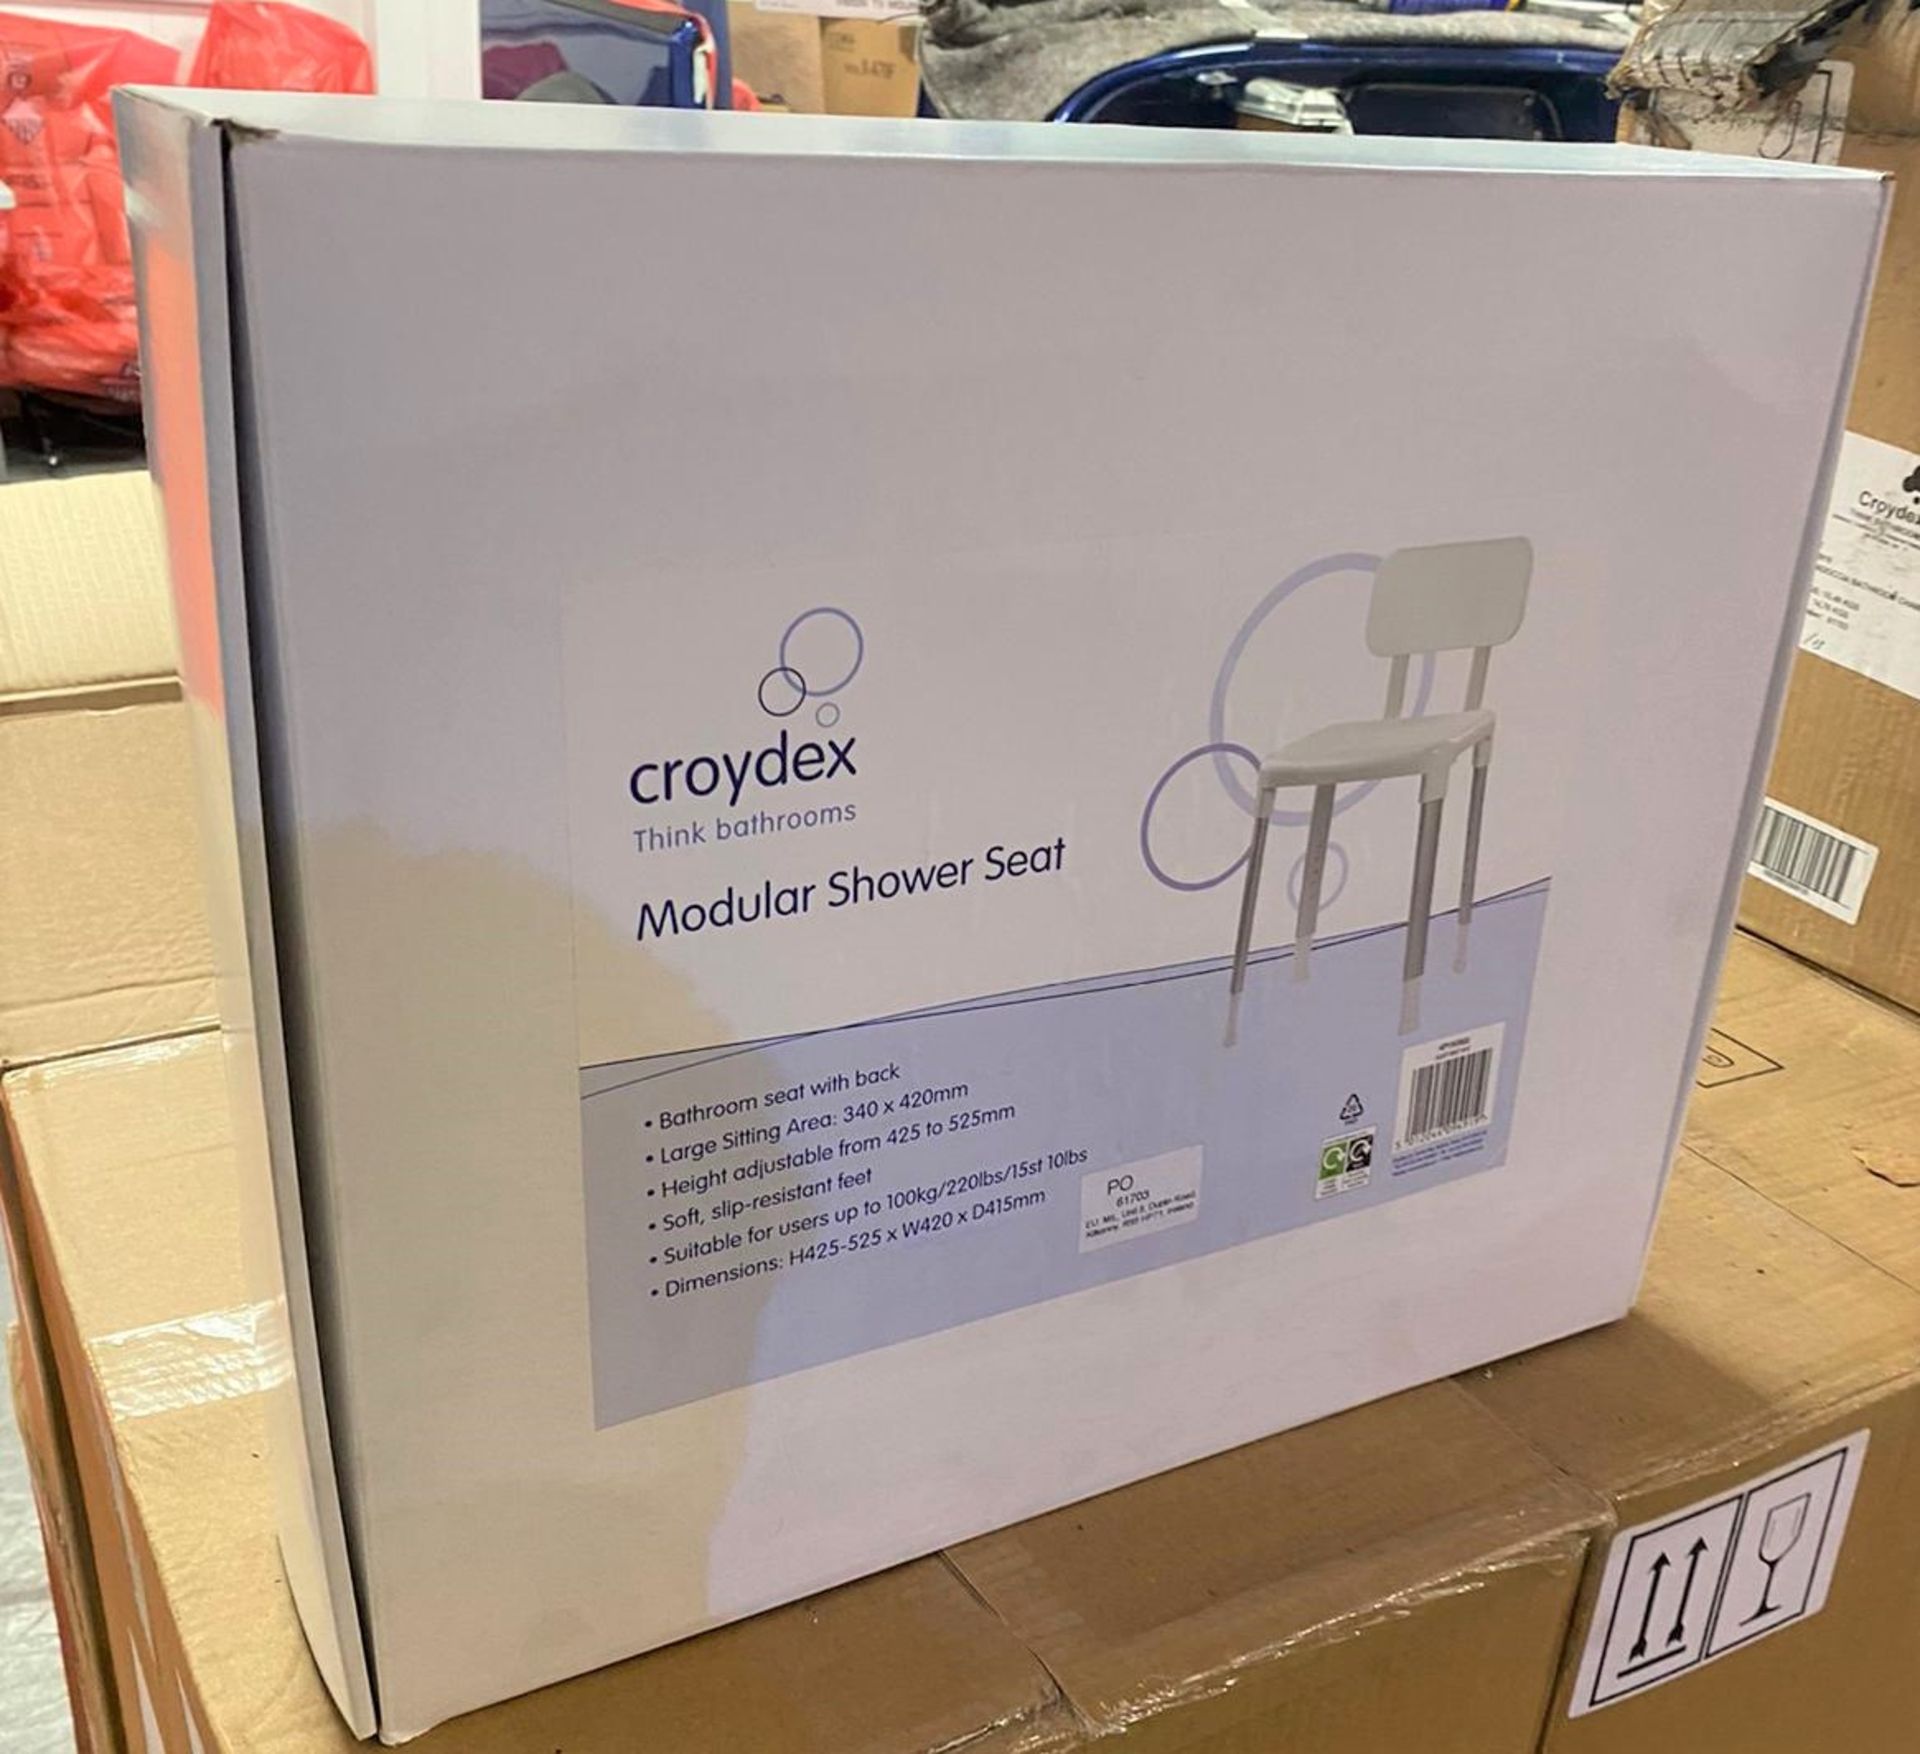 10 x Croydex Modular Shower Seats - New Boxed Stock - RRP £660 - CL740 - Ref: SRS028 - Location: - Image 2 of 3